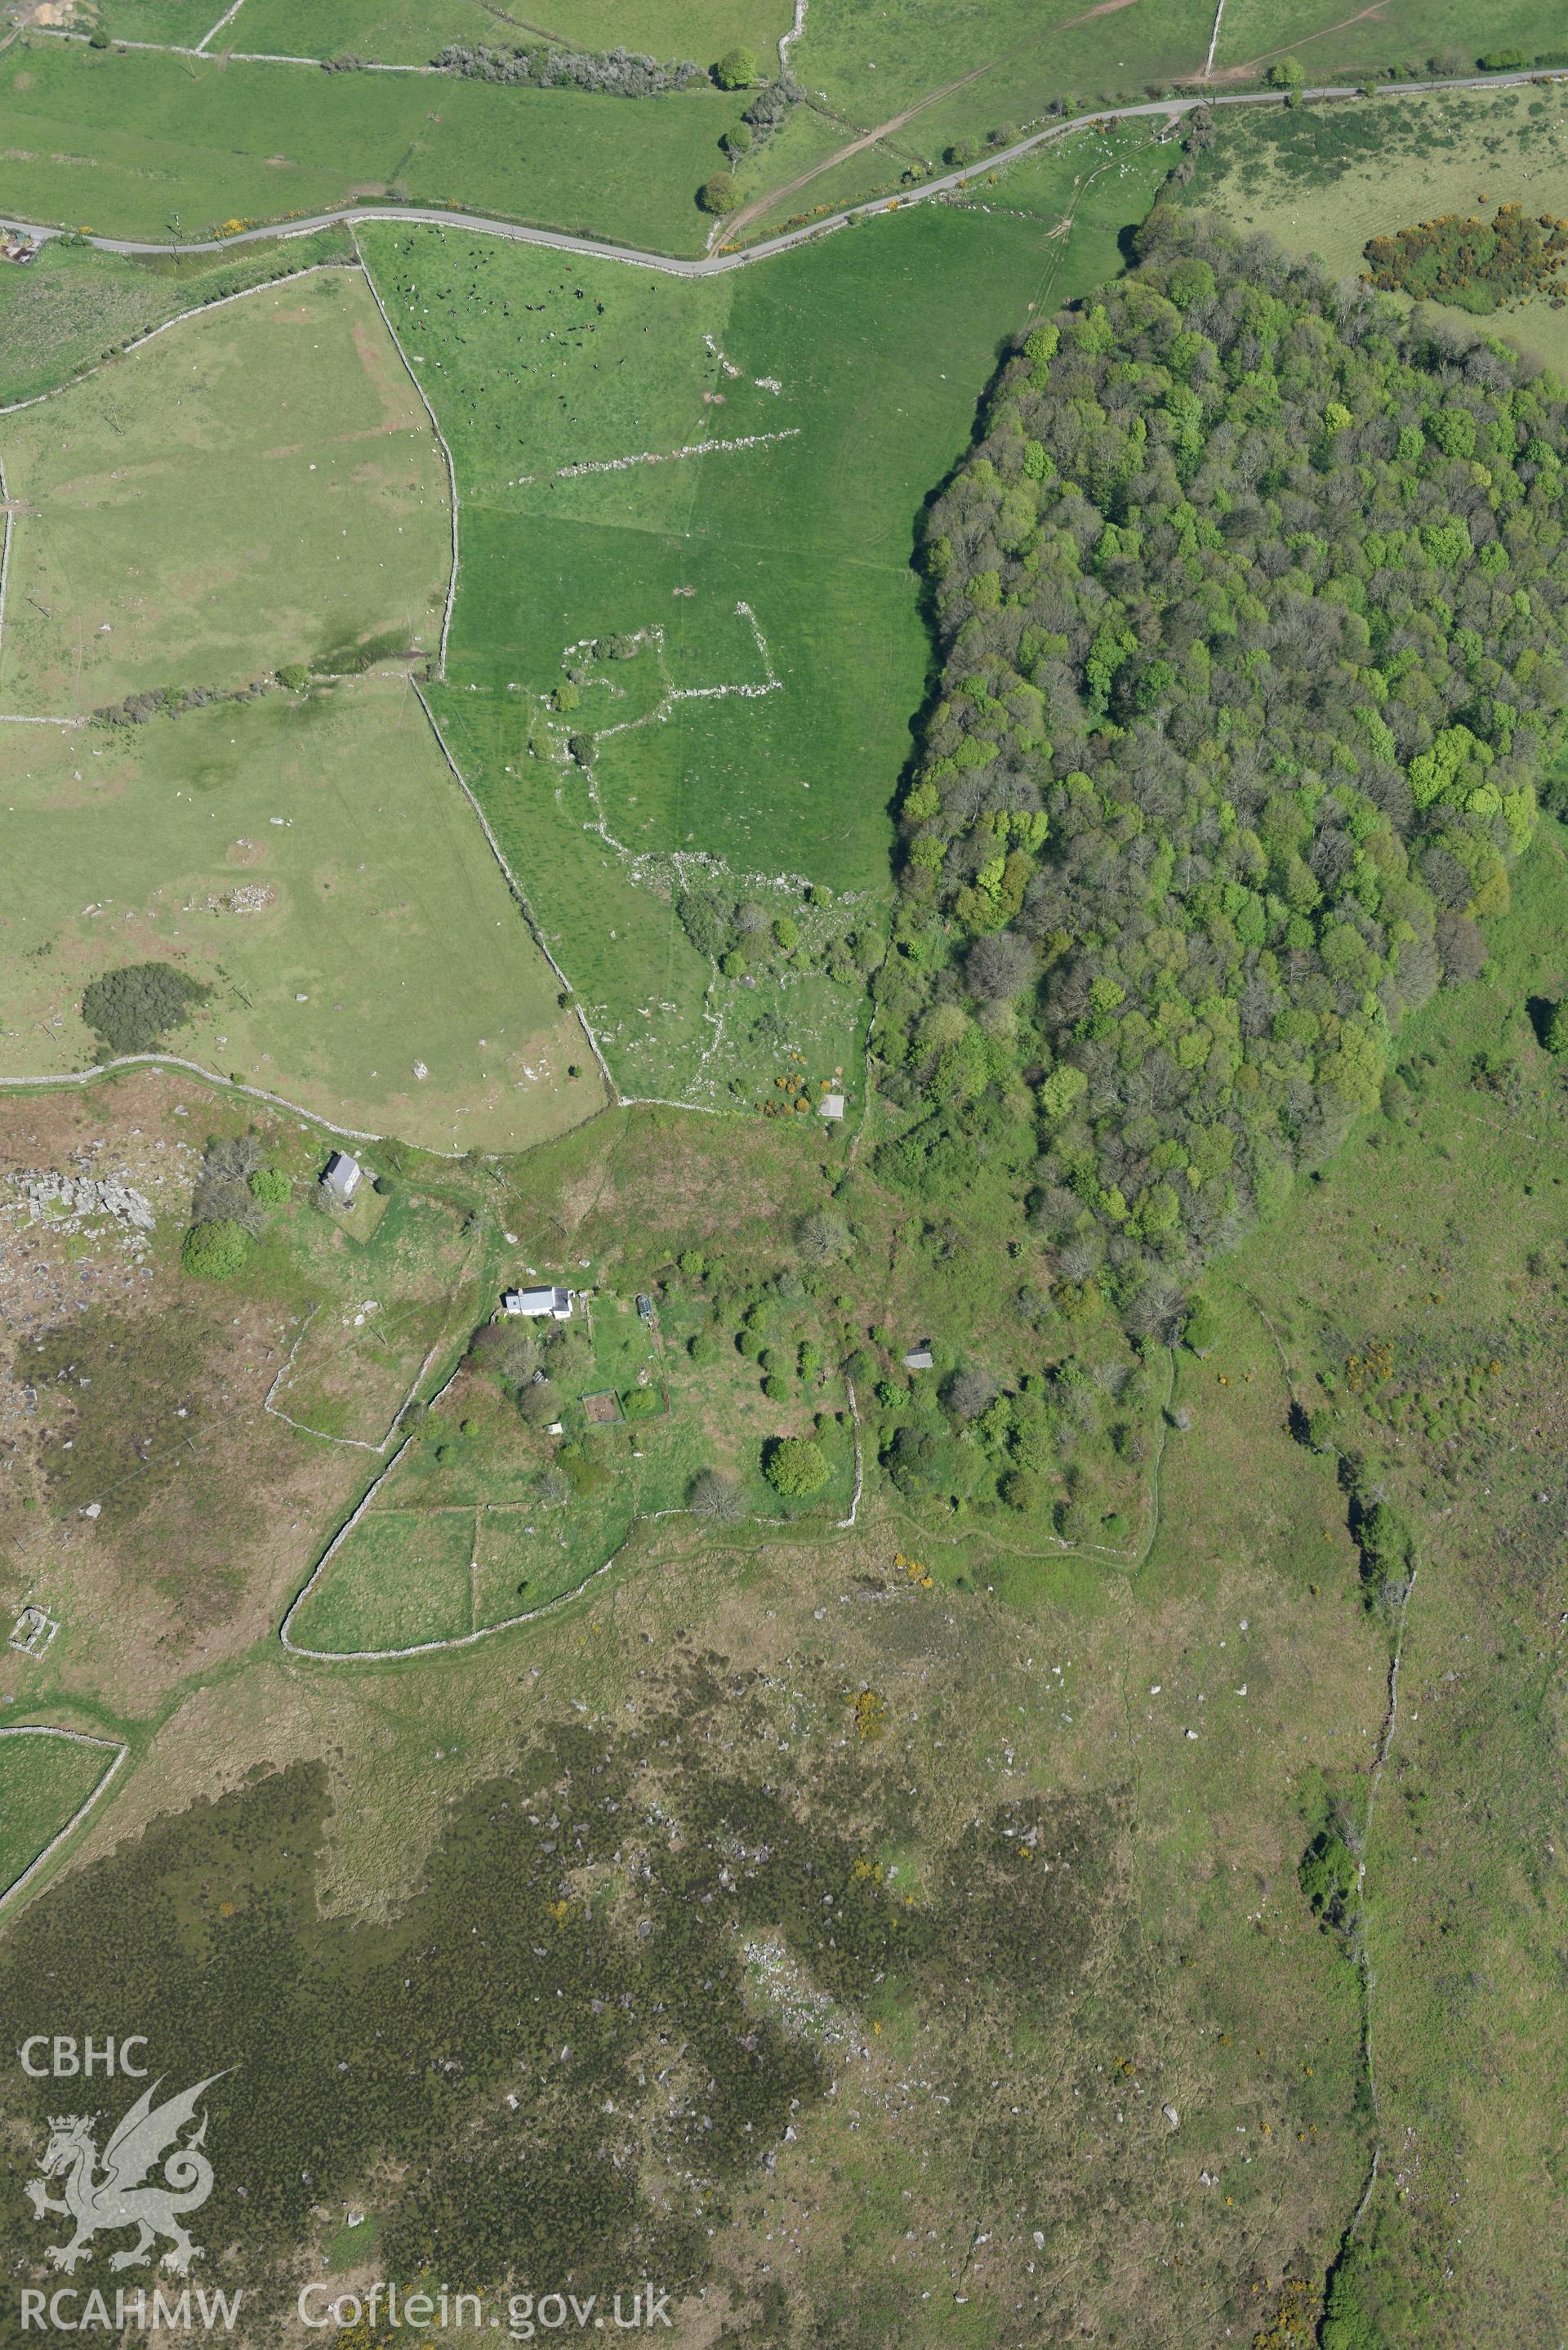 Aerial photography of Hut circle and fields south of Rhiw, taken on 3rd May 2017.  Baseline aerial reconnaissance survey for the CHERISH Project. ? Crown: CHERISH PROJECT 2017. Produced with EU funds through the Ireland Wales Co-operation Programme 2014-2020. All material made freely available through the Open Government Licence.